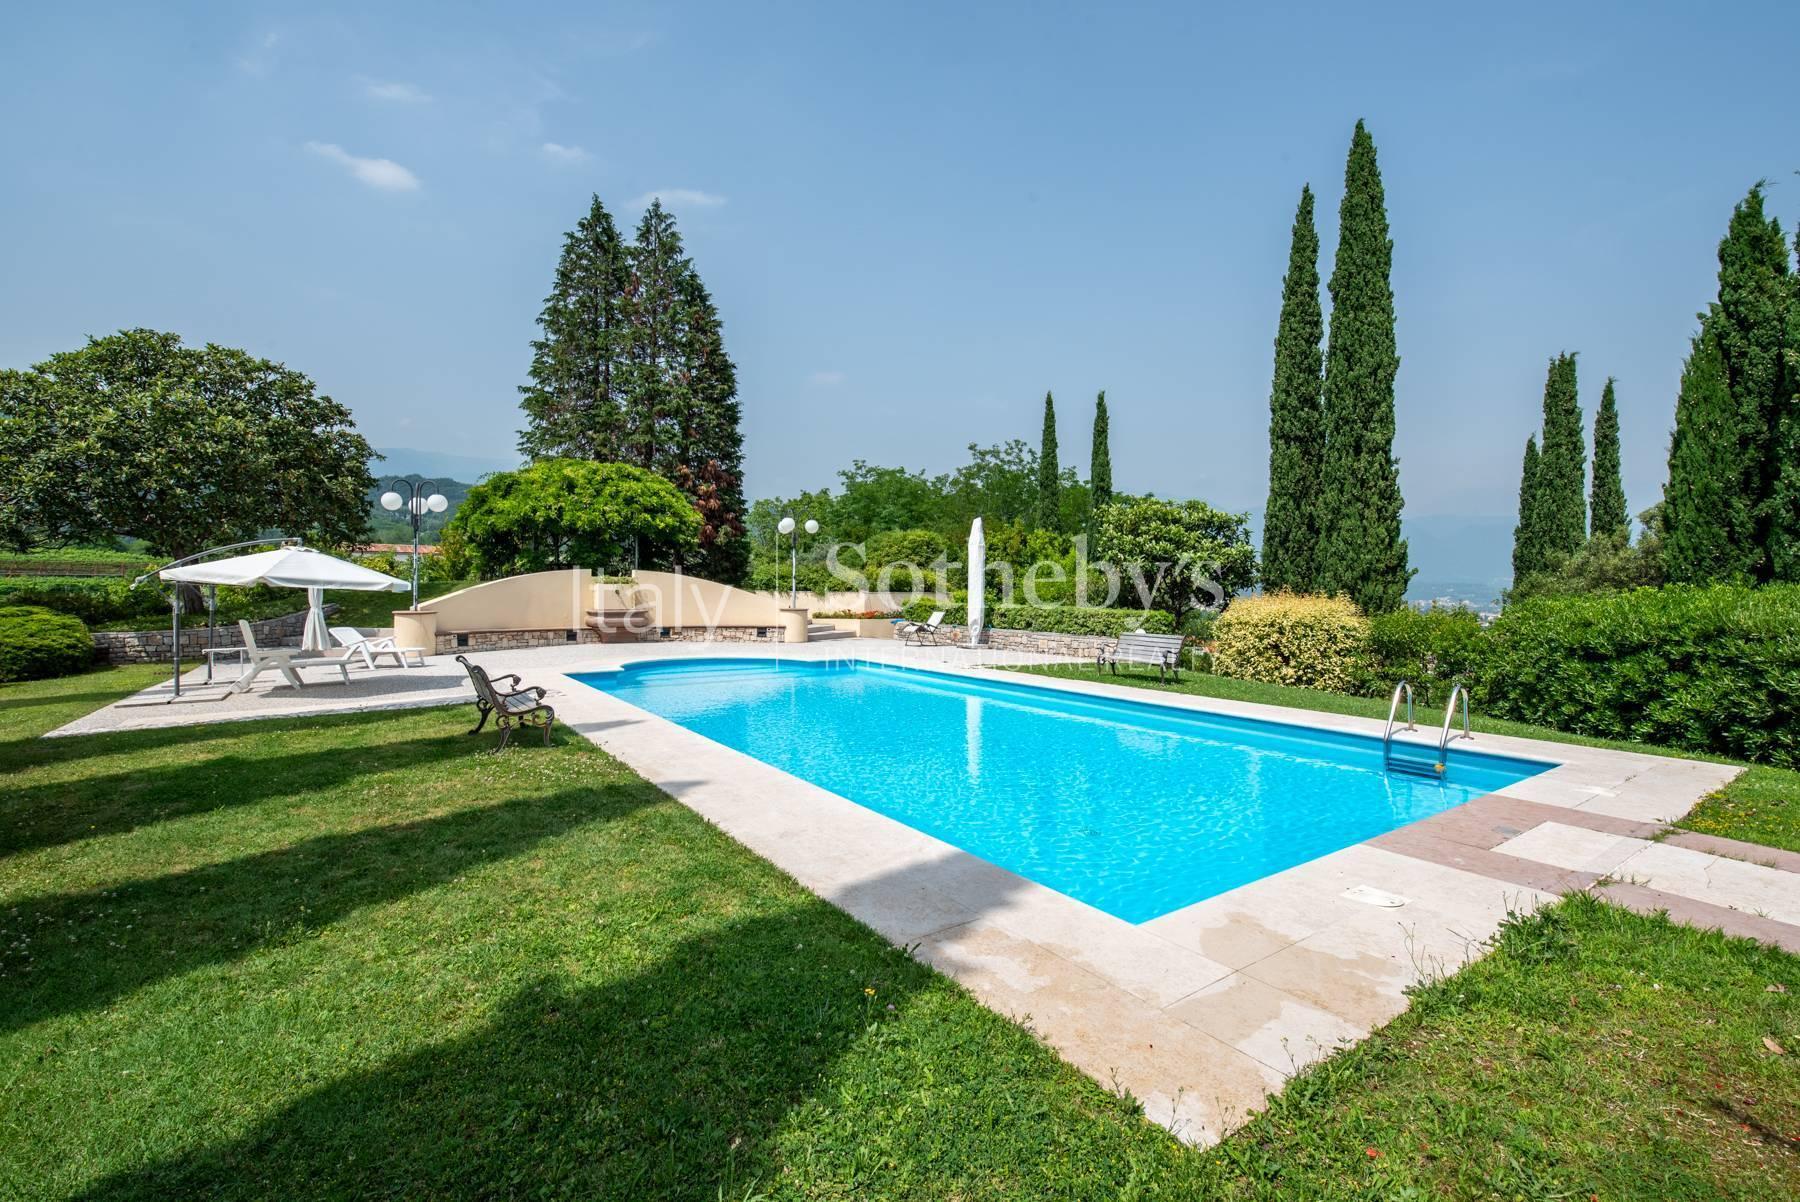 Elegant historic villa with hilly park and swimming pool - 7